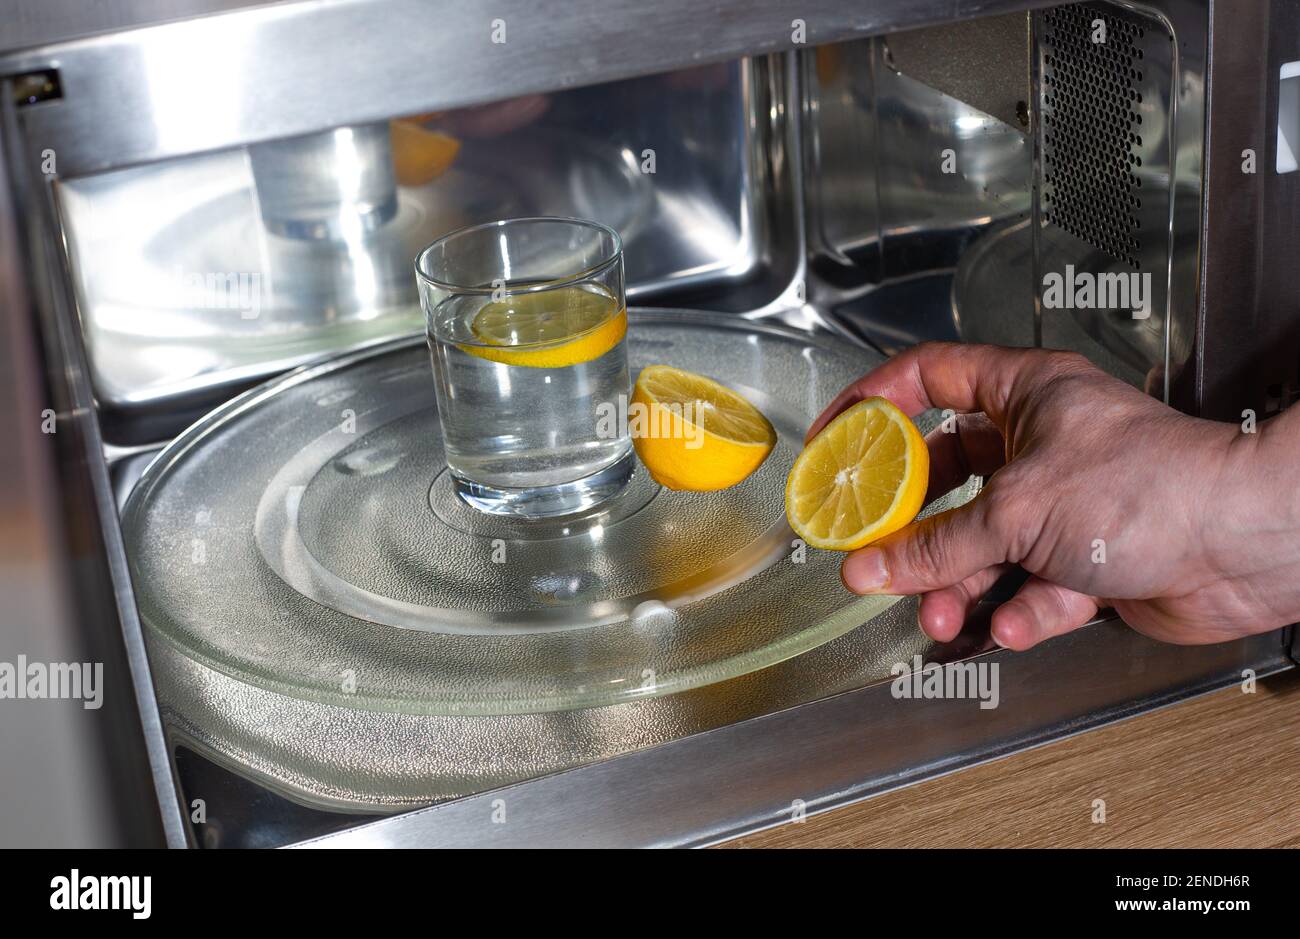 Process of cleaning or purifying the microwave oven by lemon and water Stock Photo